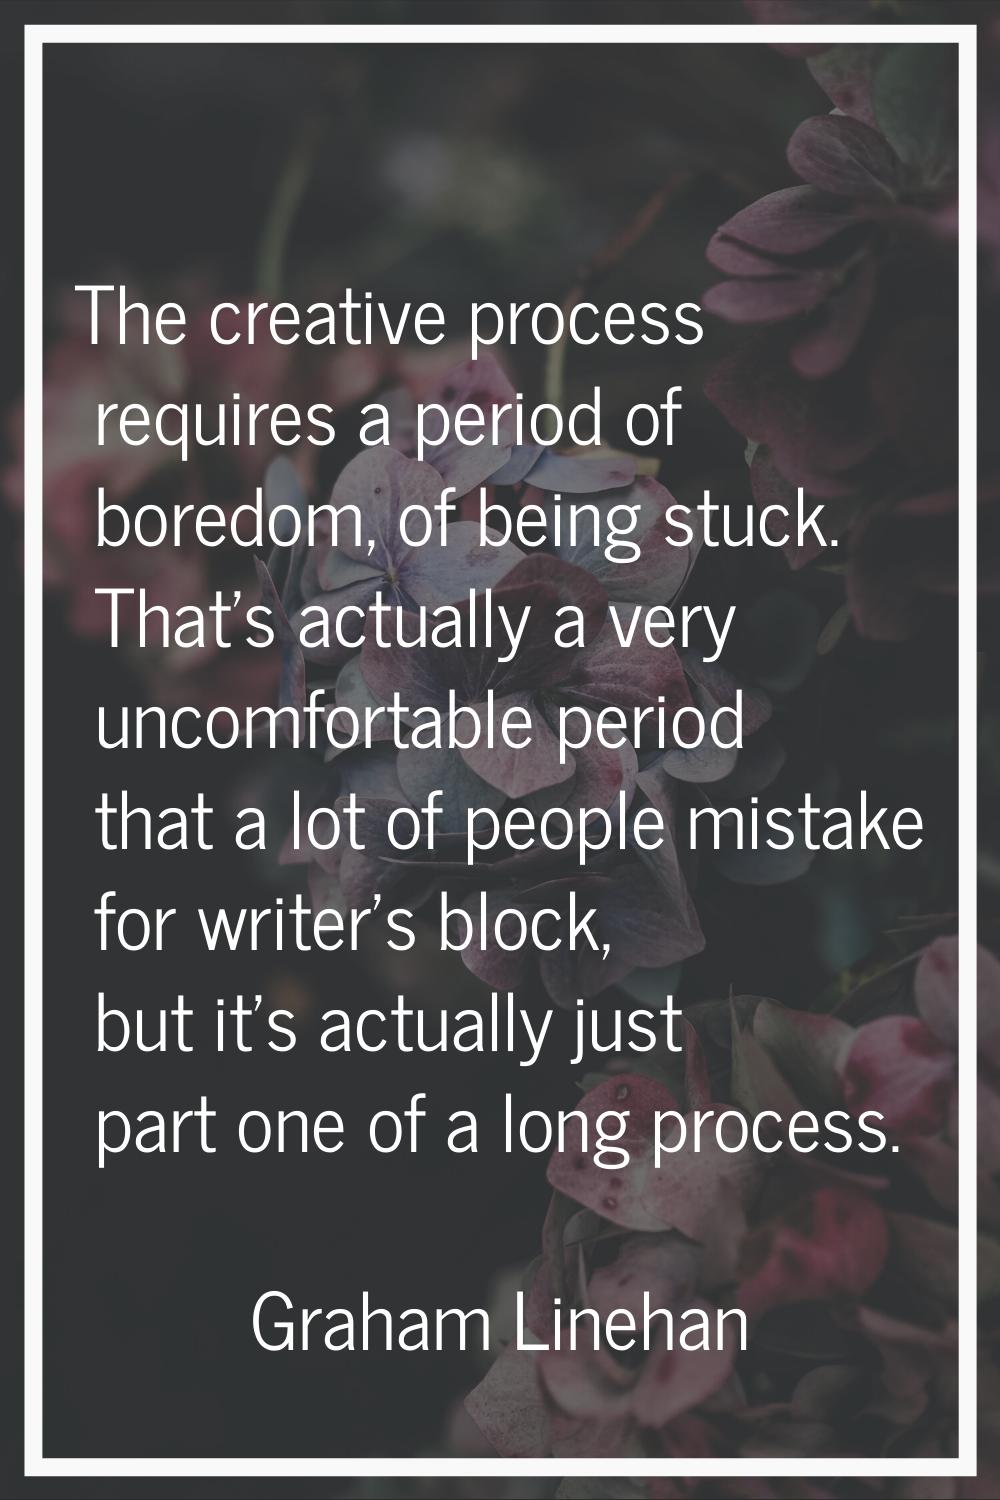 The creative process requires a period of boredom, of being stuck. That's actually a very uncomfort